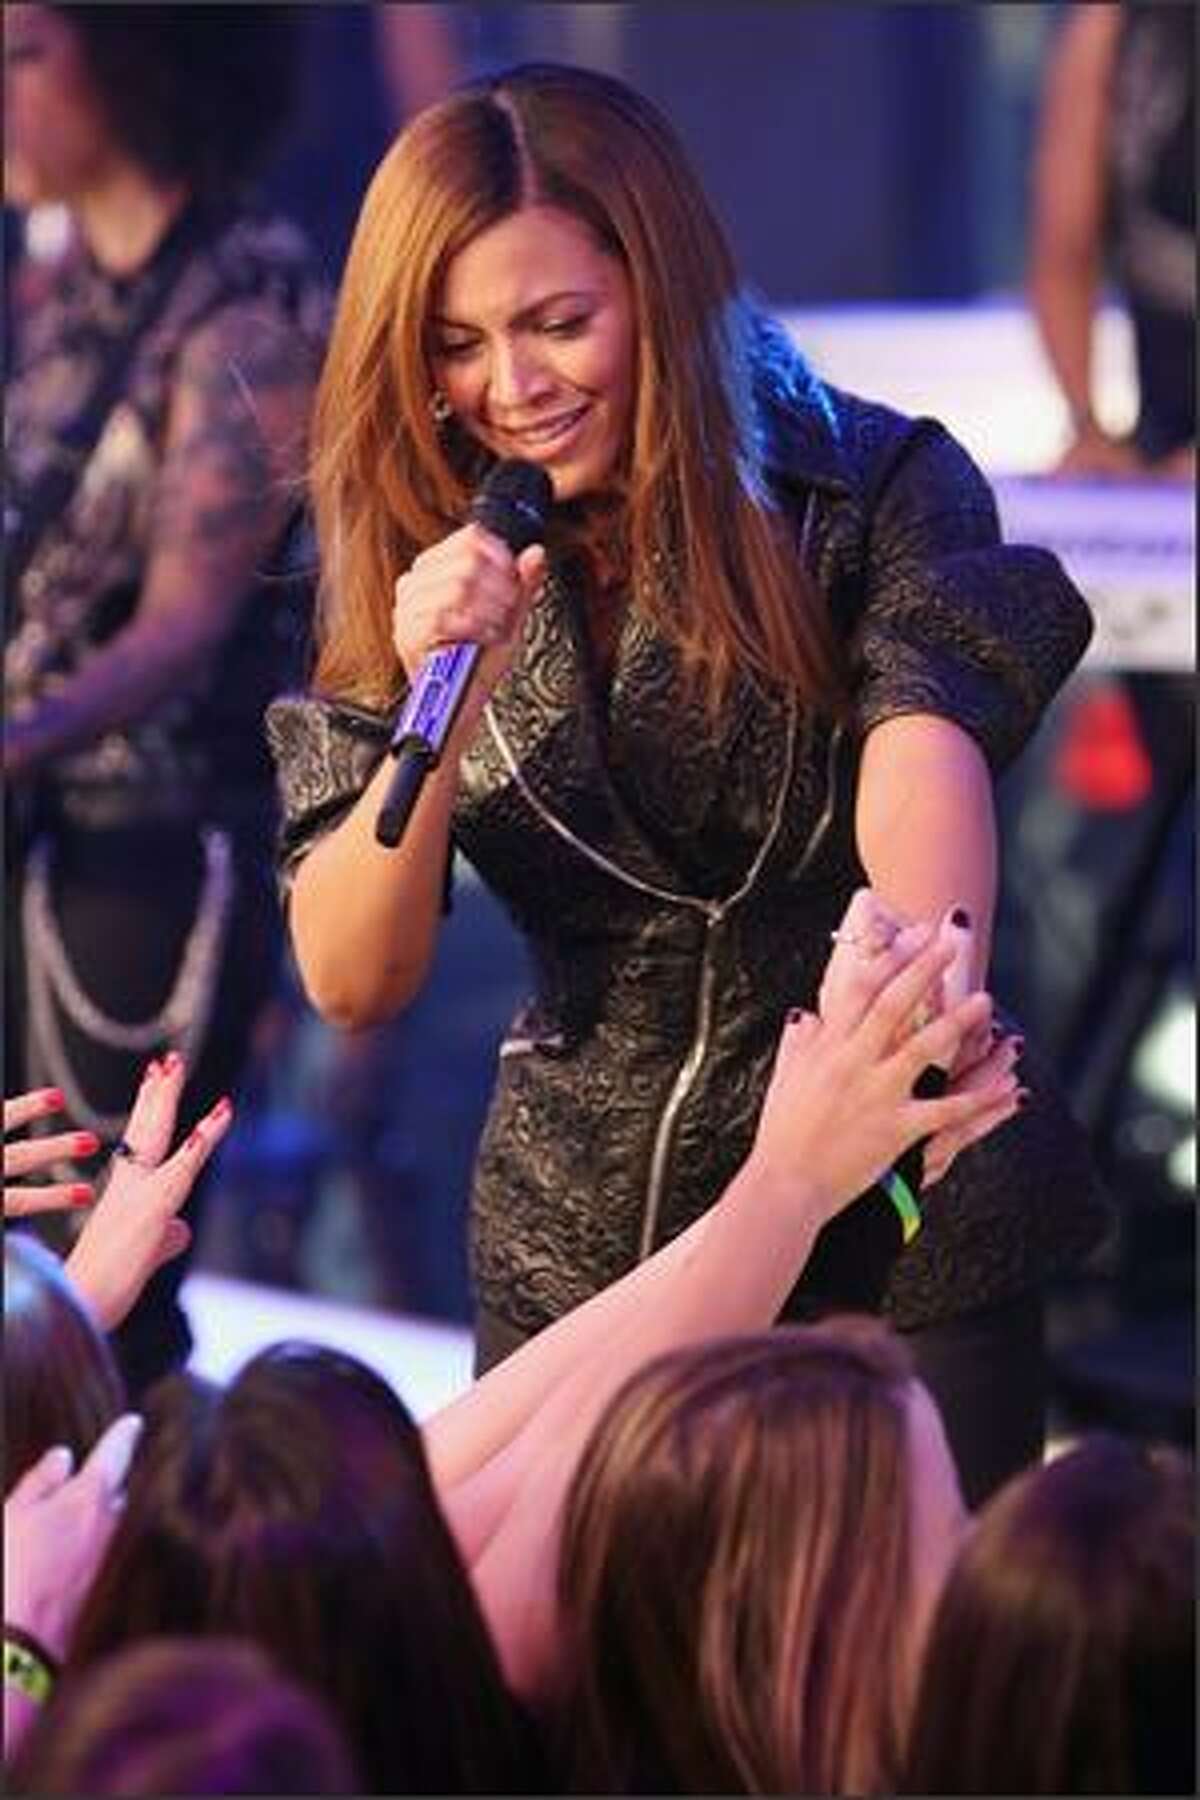 Singer Beyonce performs during MTV's TRL "Total Finale Live" at the MTV studios in Times Square on Sunday in New York.